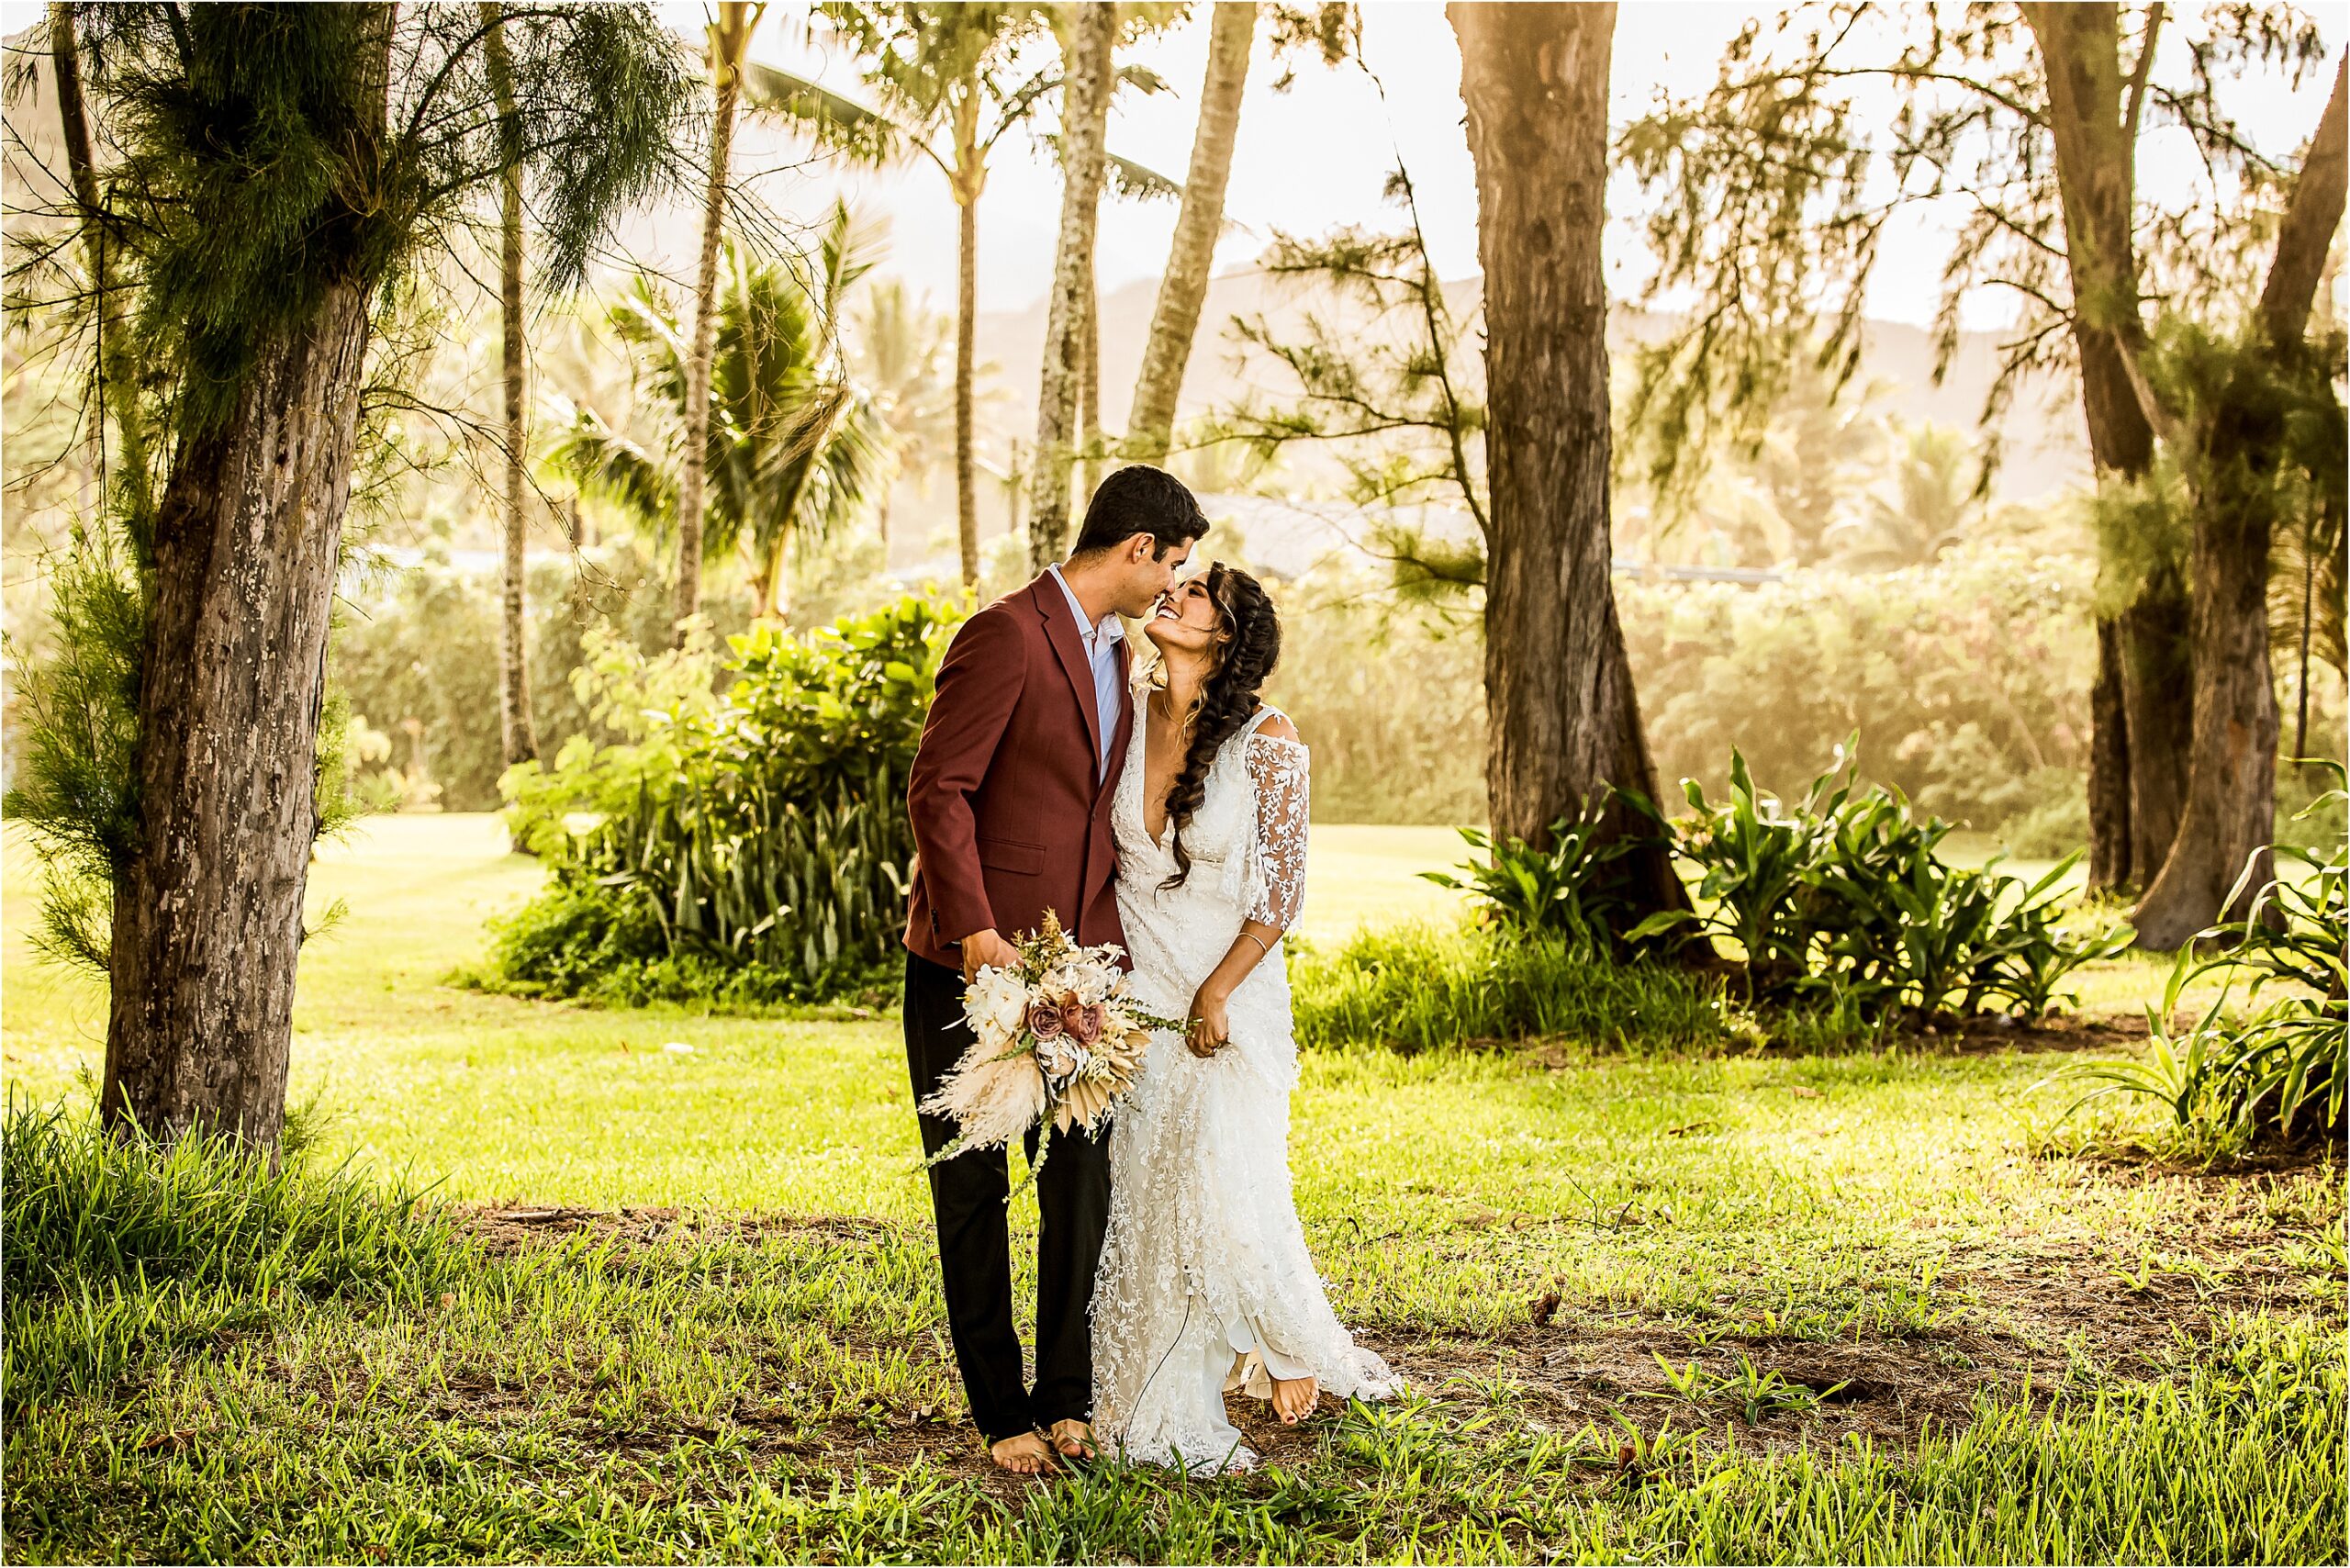 Wedding elopement photography of Golden hour in the palm trees of Kauai with bride and groom